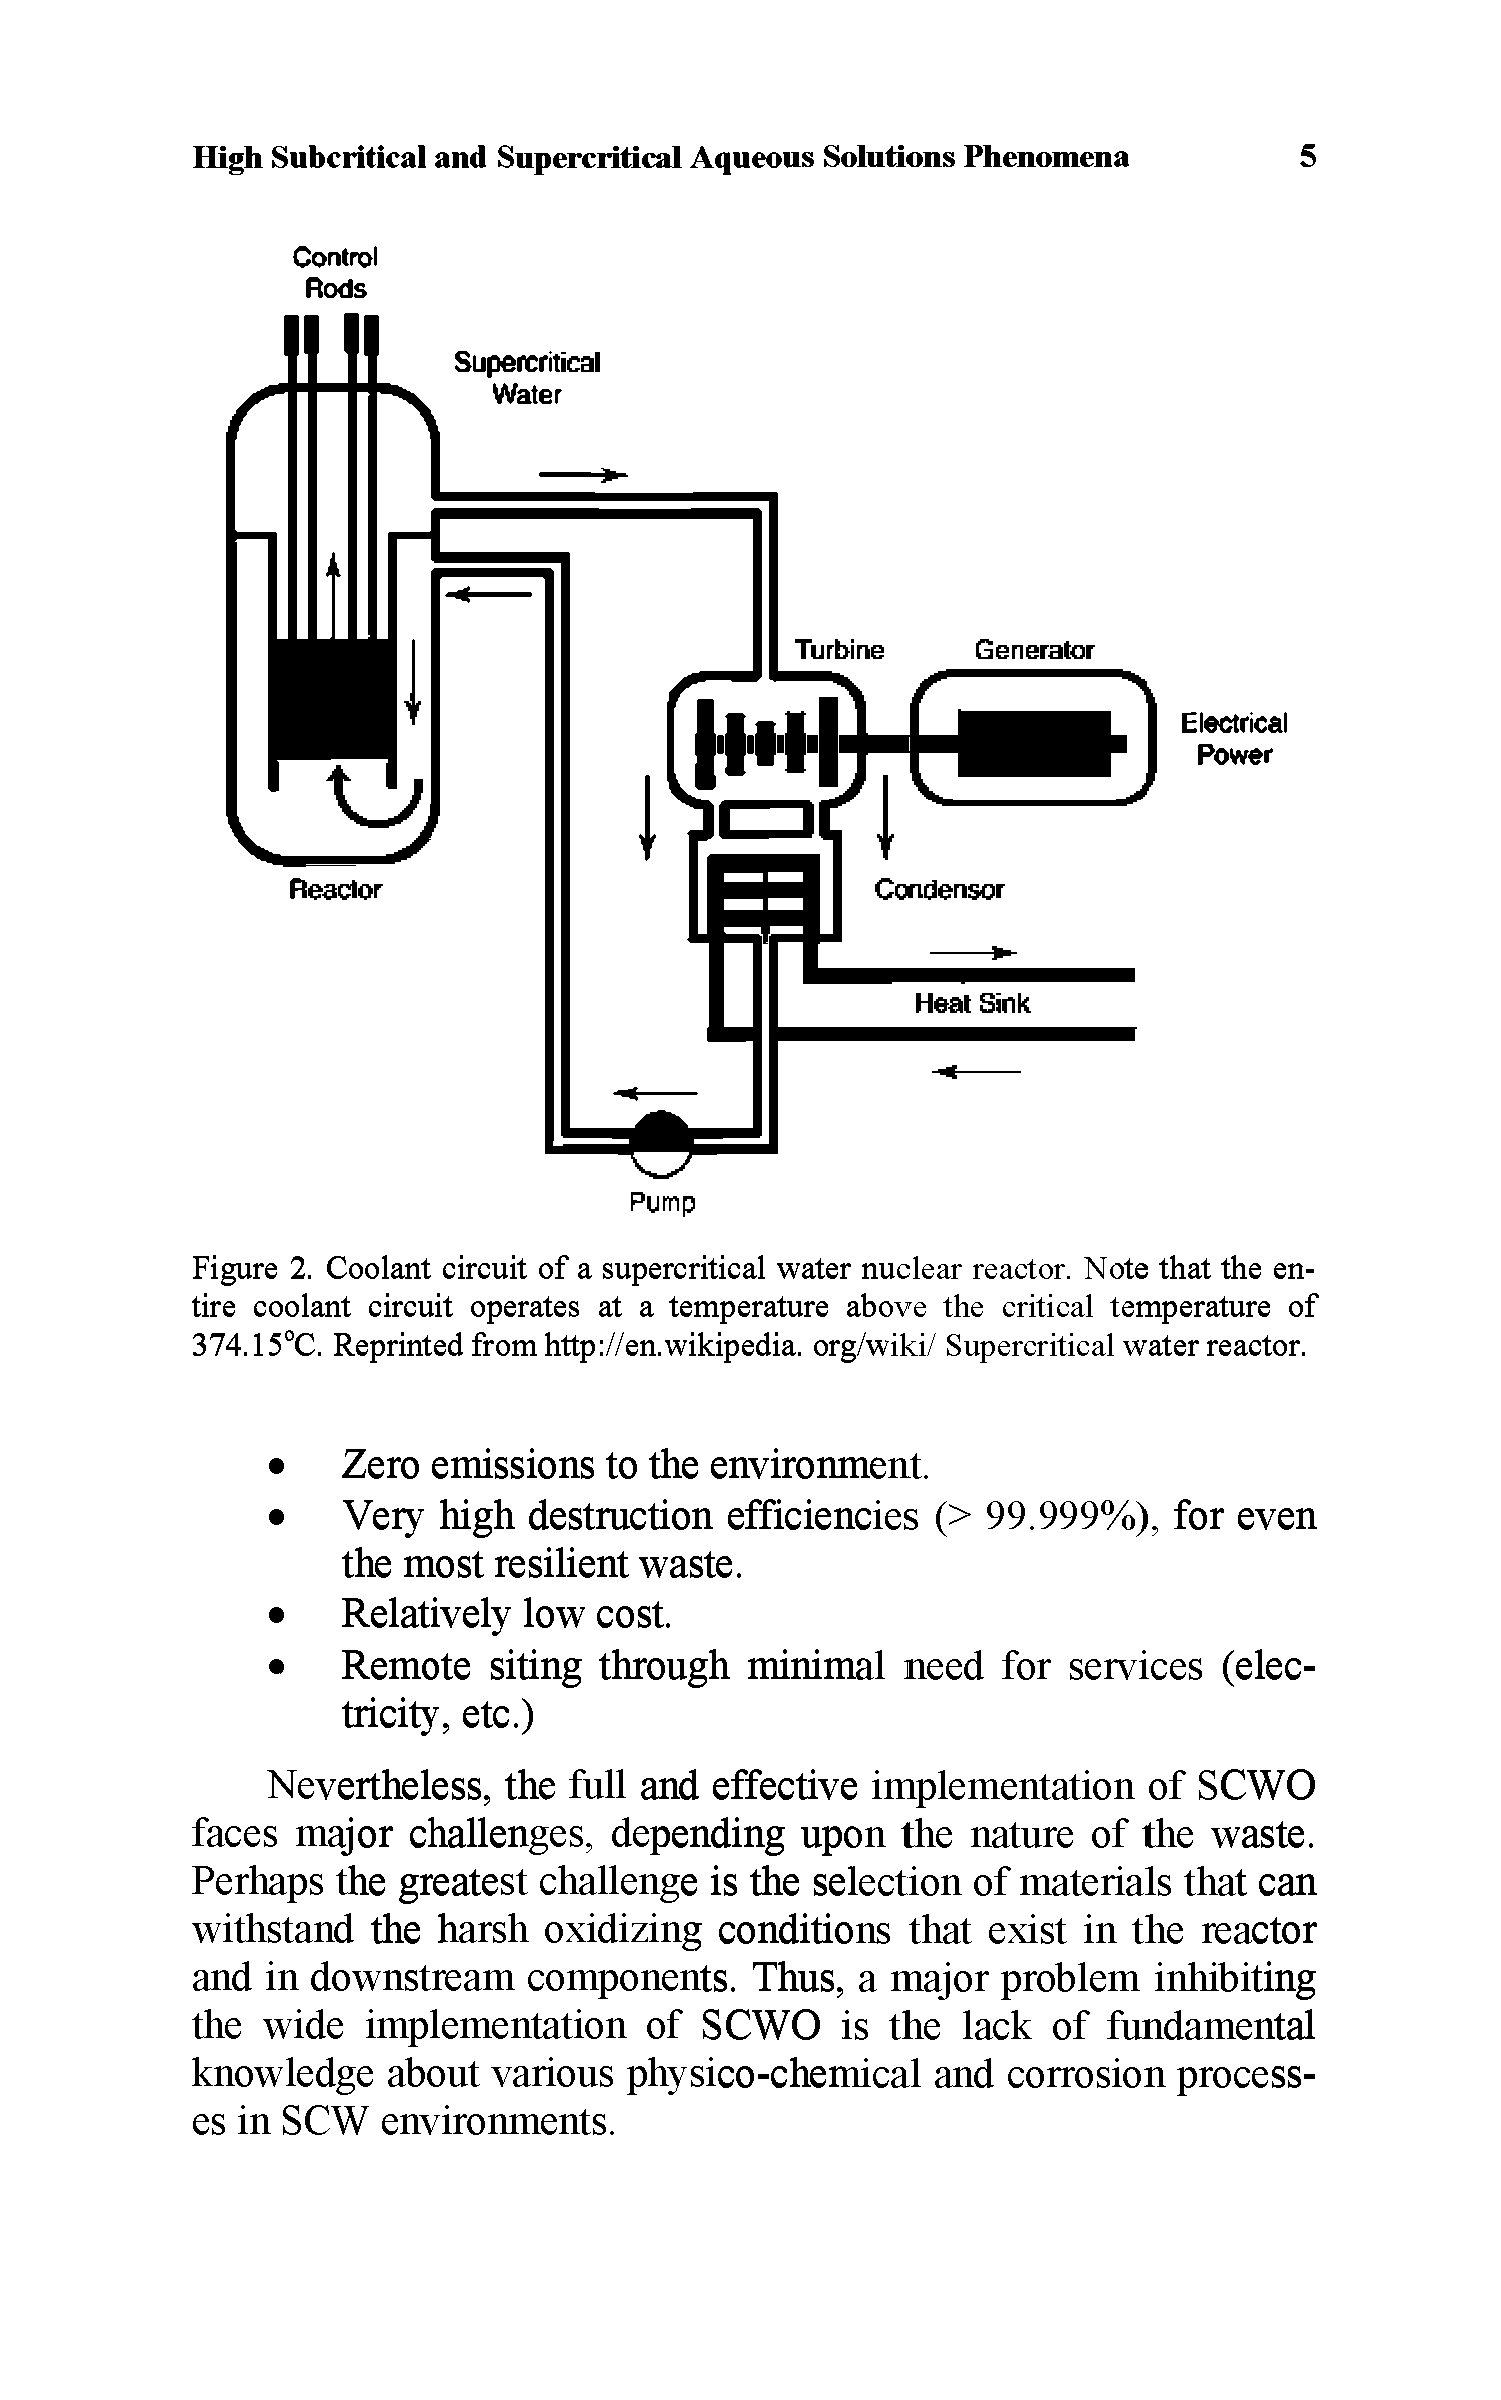 Figure 2. Coolant circuit of a supercritical water nuclear reactor. Note that the entire coolant circuit operates at a temperature above the critical temperature of 374.15°C. Reprinted from http //en.Wikipedia, org/wiki/ Supercritical water reactor.